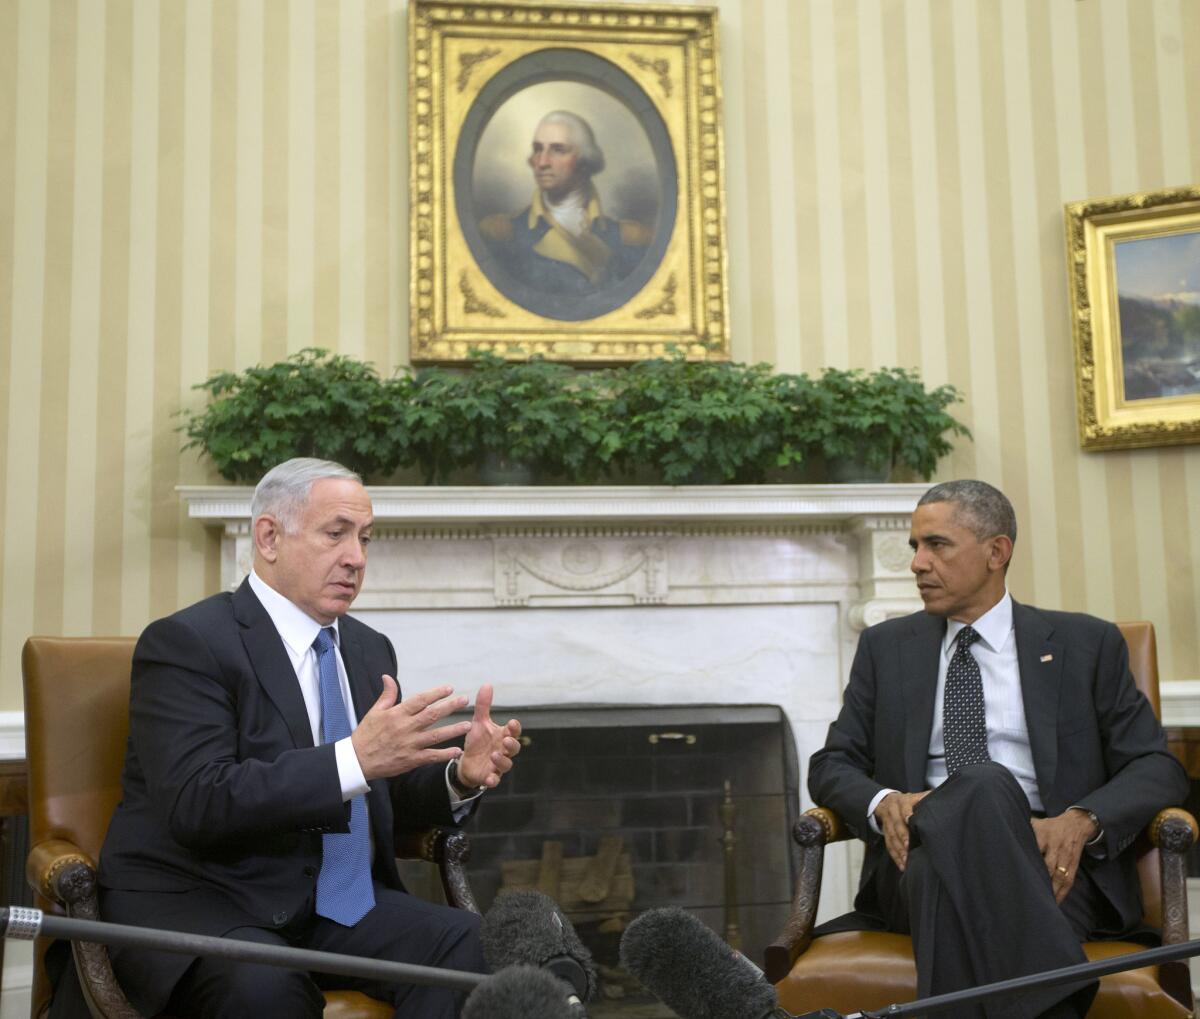 President Barack Obama meets with Israeli Prime Minister Benjamin Netanyahu in the Oval Office in September. Obama will not meet with Netanyahu when he travels to Washington in March.